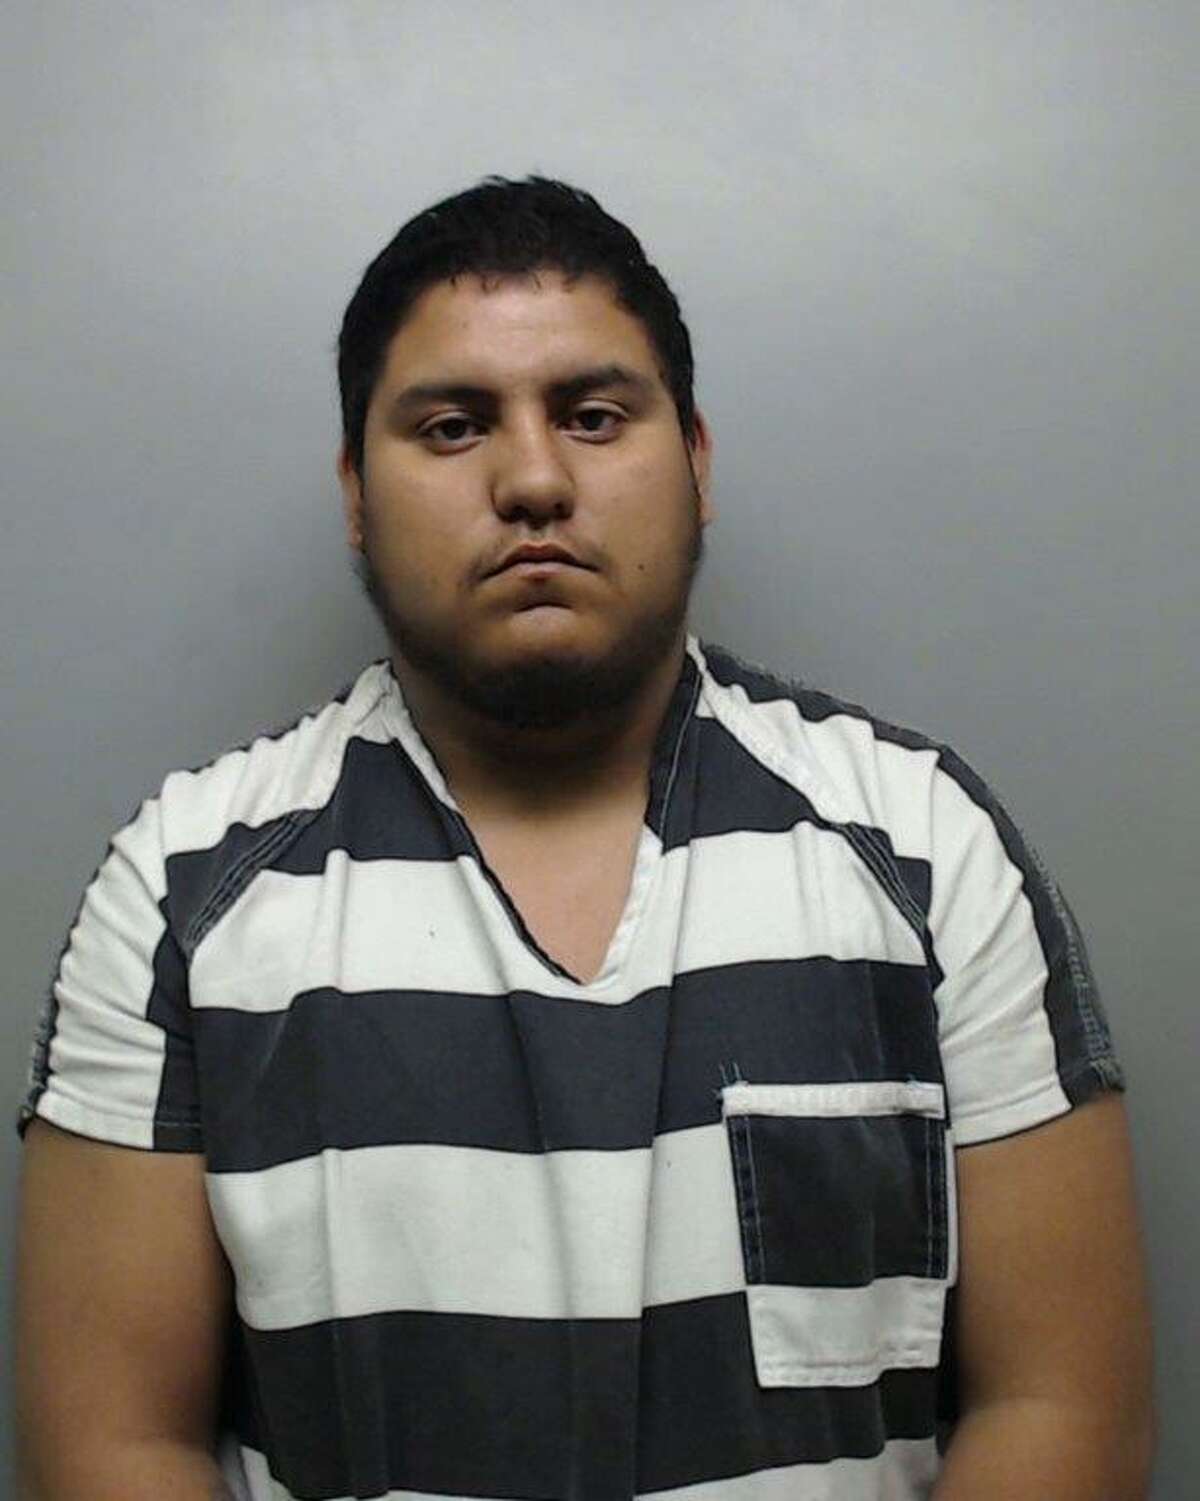 Christian Reyna, 22, possession of a controlled substance.